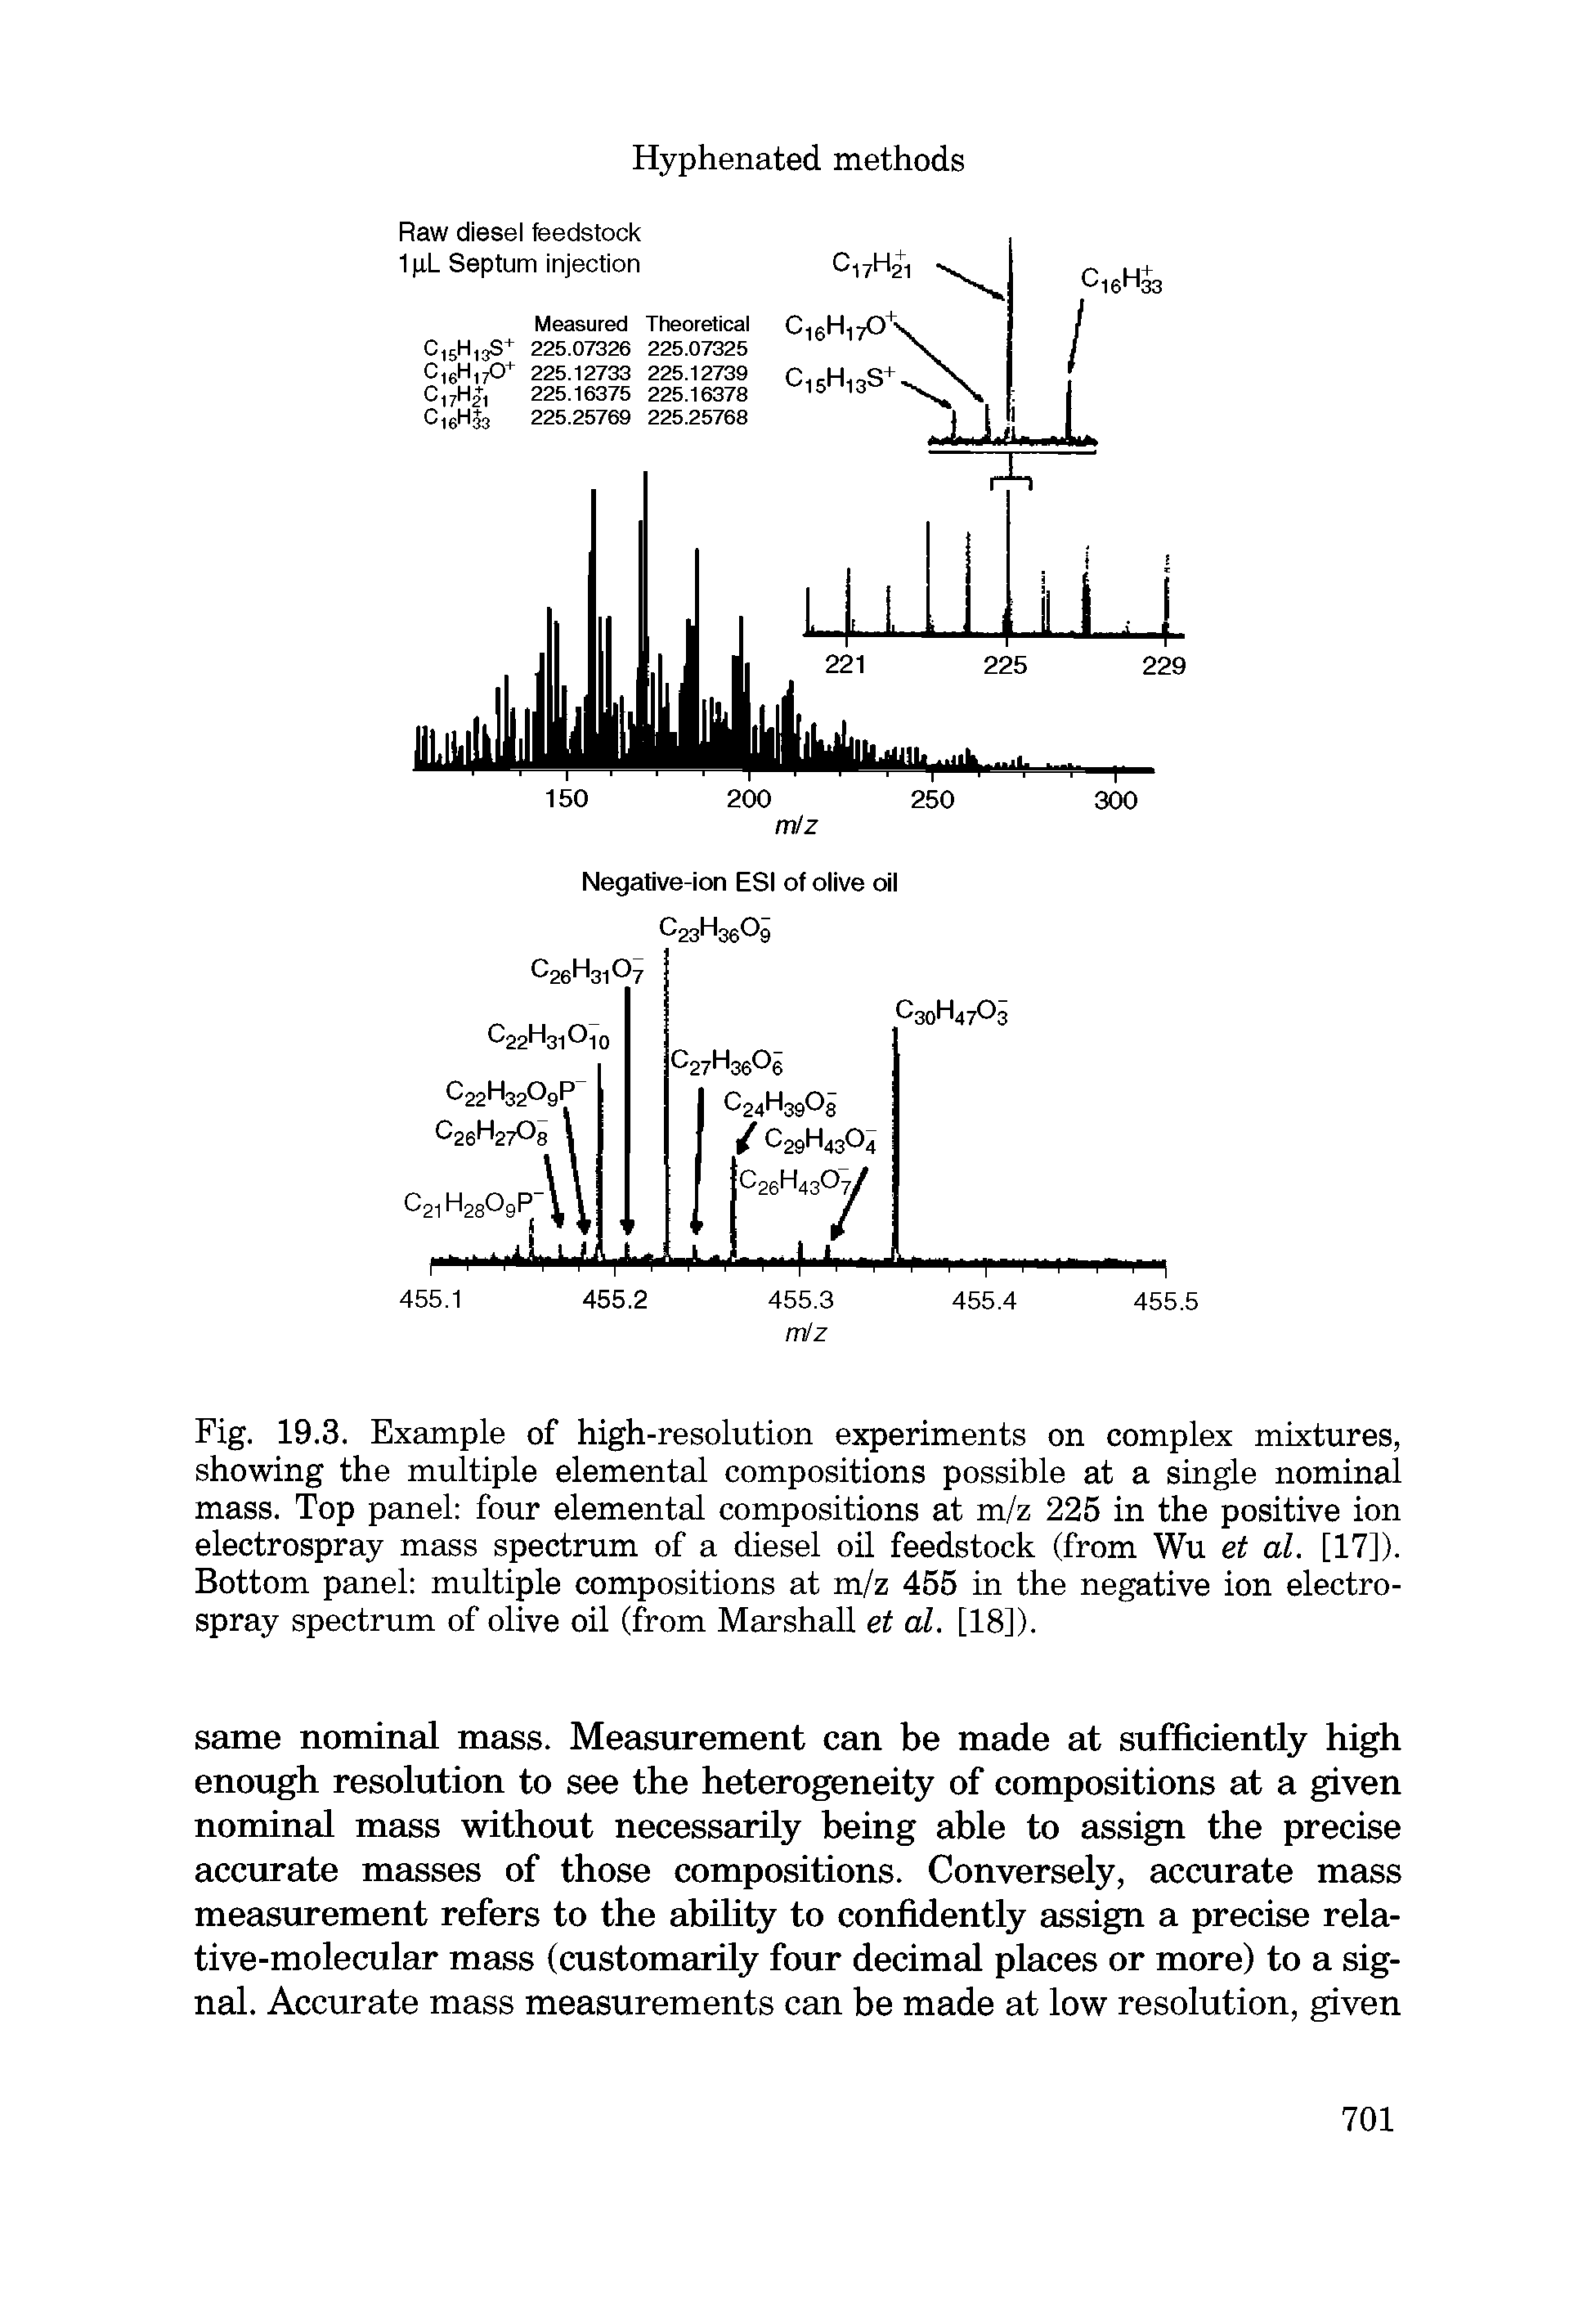 Fig. 19.3. Example of high-resolution experiments on complex mixtures, showing the multiple elemental compositions possible at a single nominal mass. Top panel four elemental compositions at m/z 225 in the positive ion electrospray mass spectrum of a diesel oil feedstock (from Wu et al. [17]). Bottom panel multiple compositions at m/z 455 in the negative ion electrospray spectrum of olive oil (from Marshall et al. [18]).